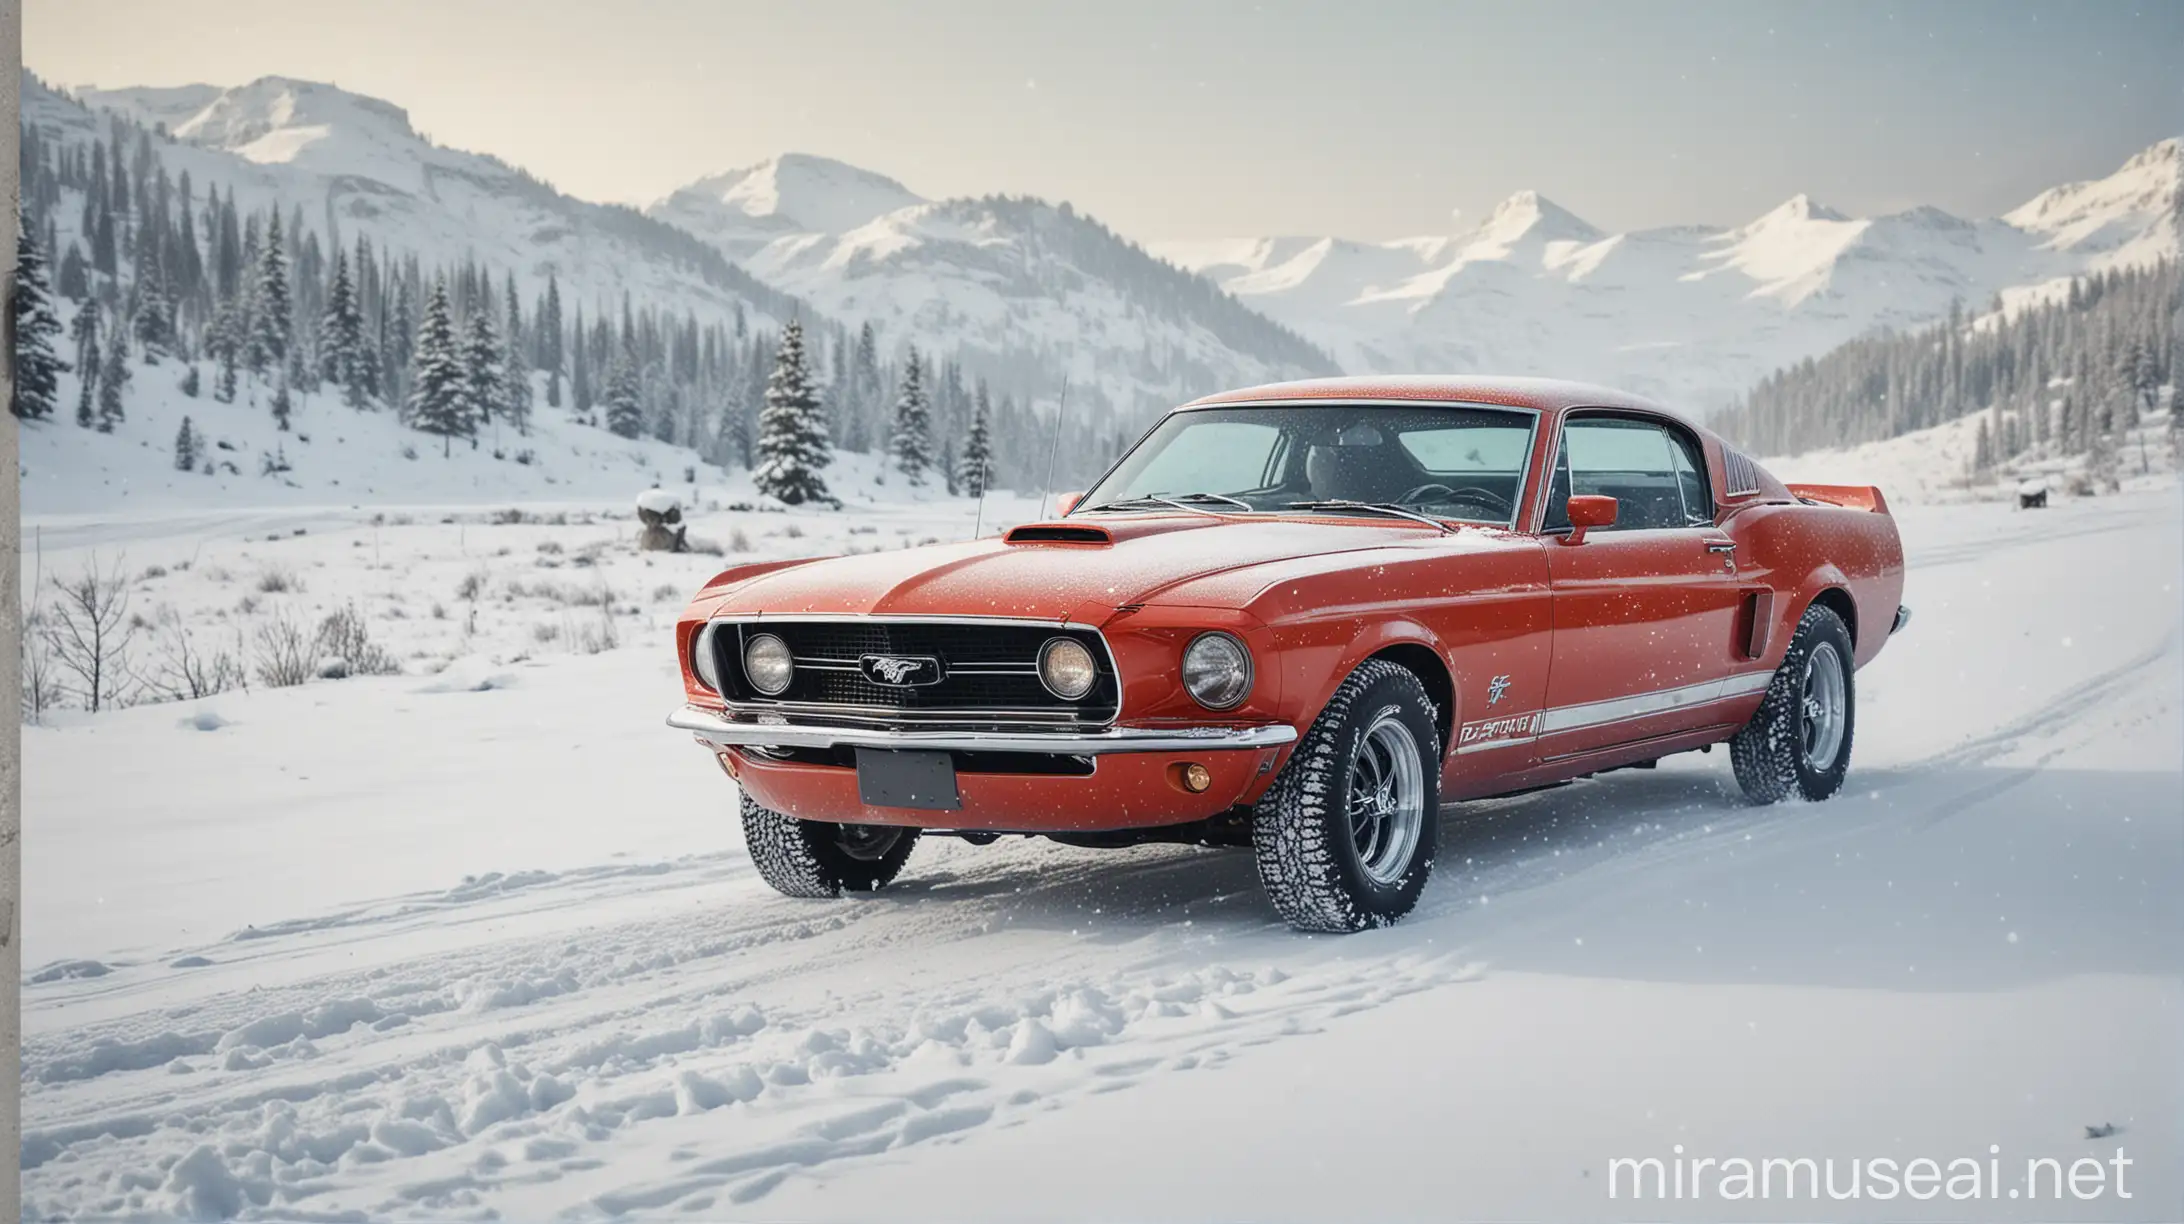 This is a picture made in flat design style. The size of the picture is 50 cm x 70 cm, orientation is portrait. In the center of the picture is a Ford Mustang 1969, which is going through a snowy landscape.